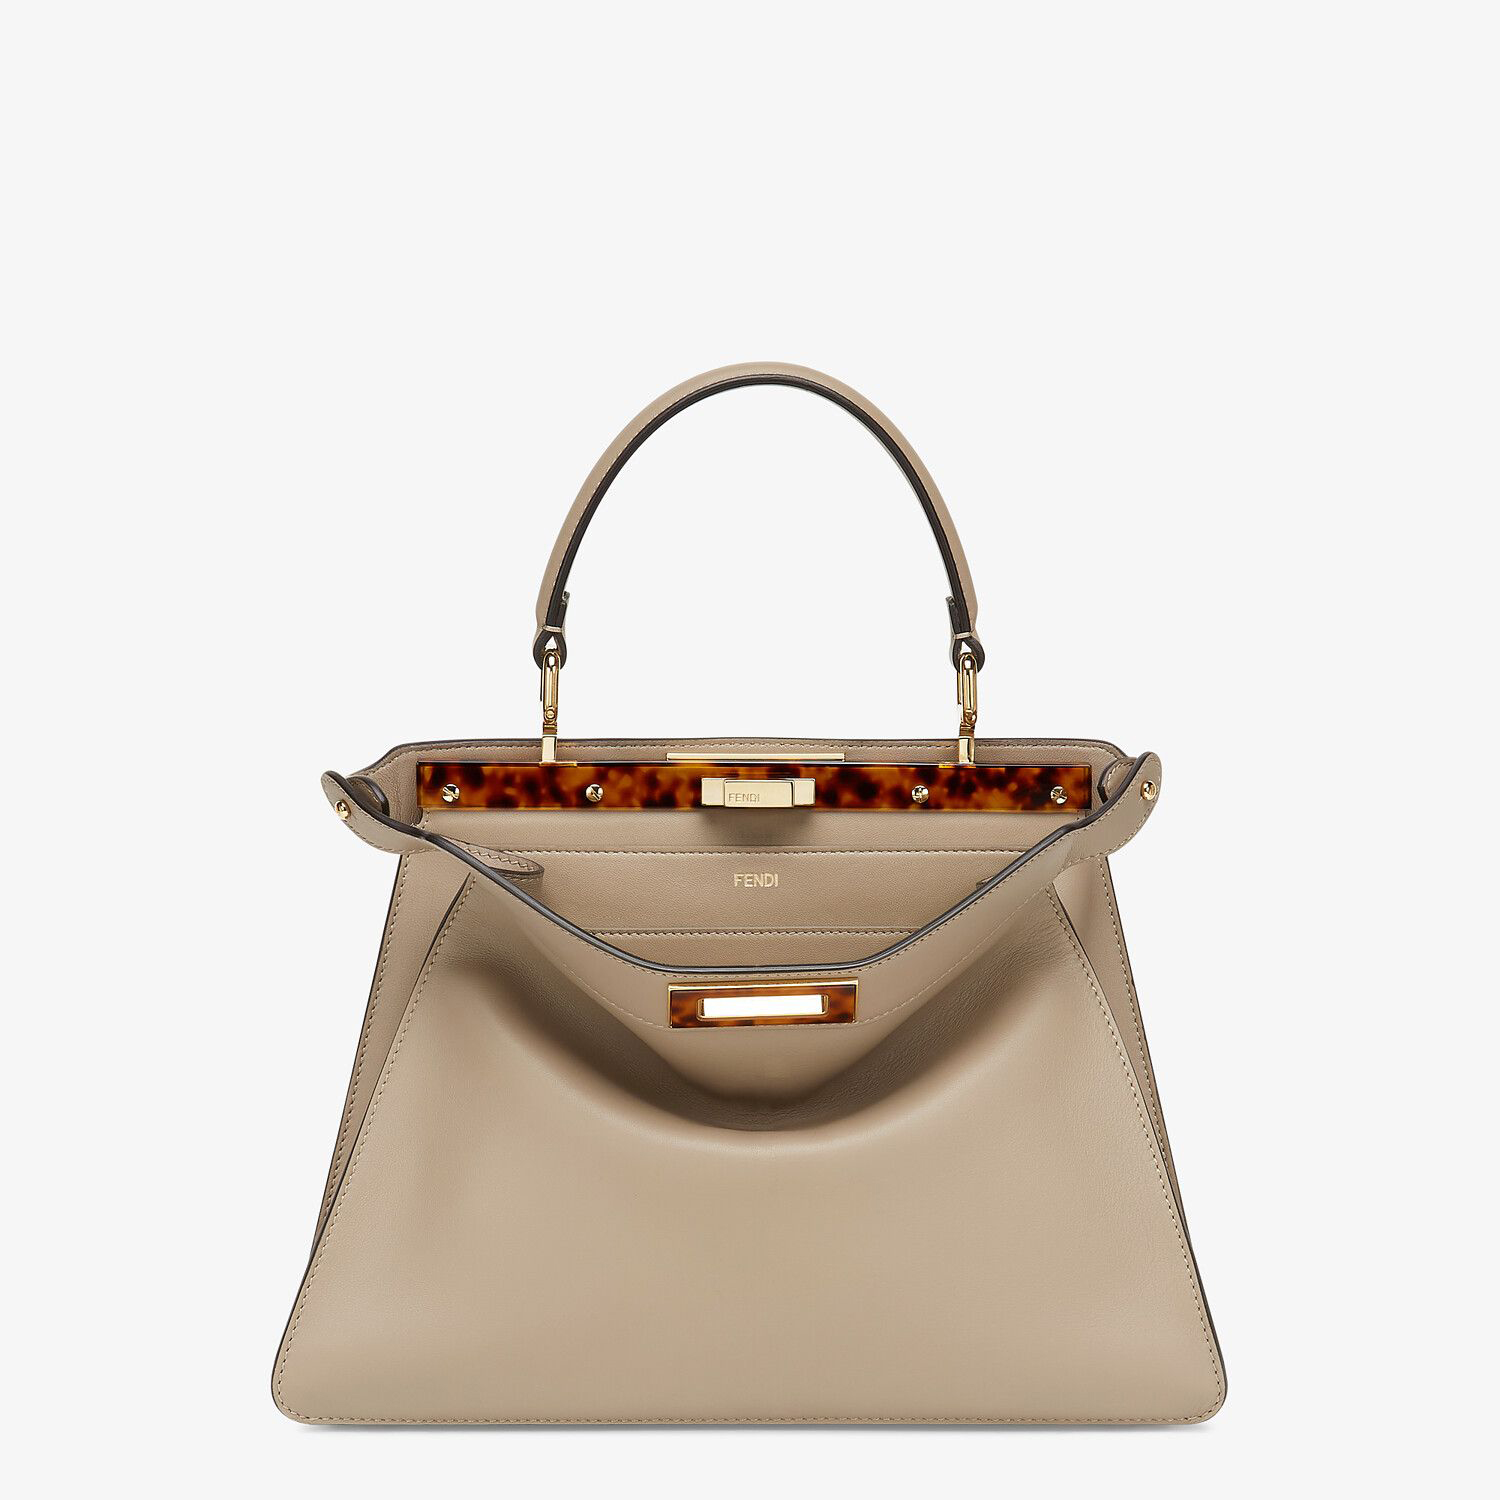 Top 13 Timeless Luxury Handbags Every Fashionista Must Have in Their C –  Bagaholic